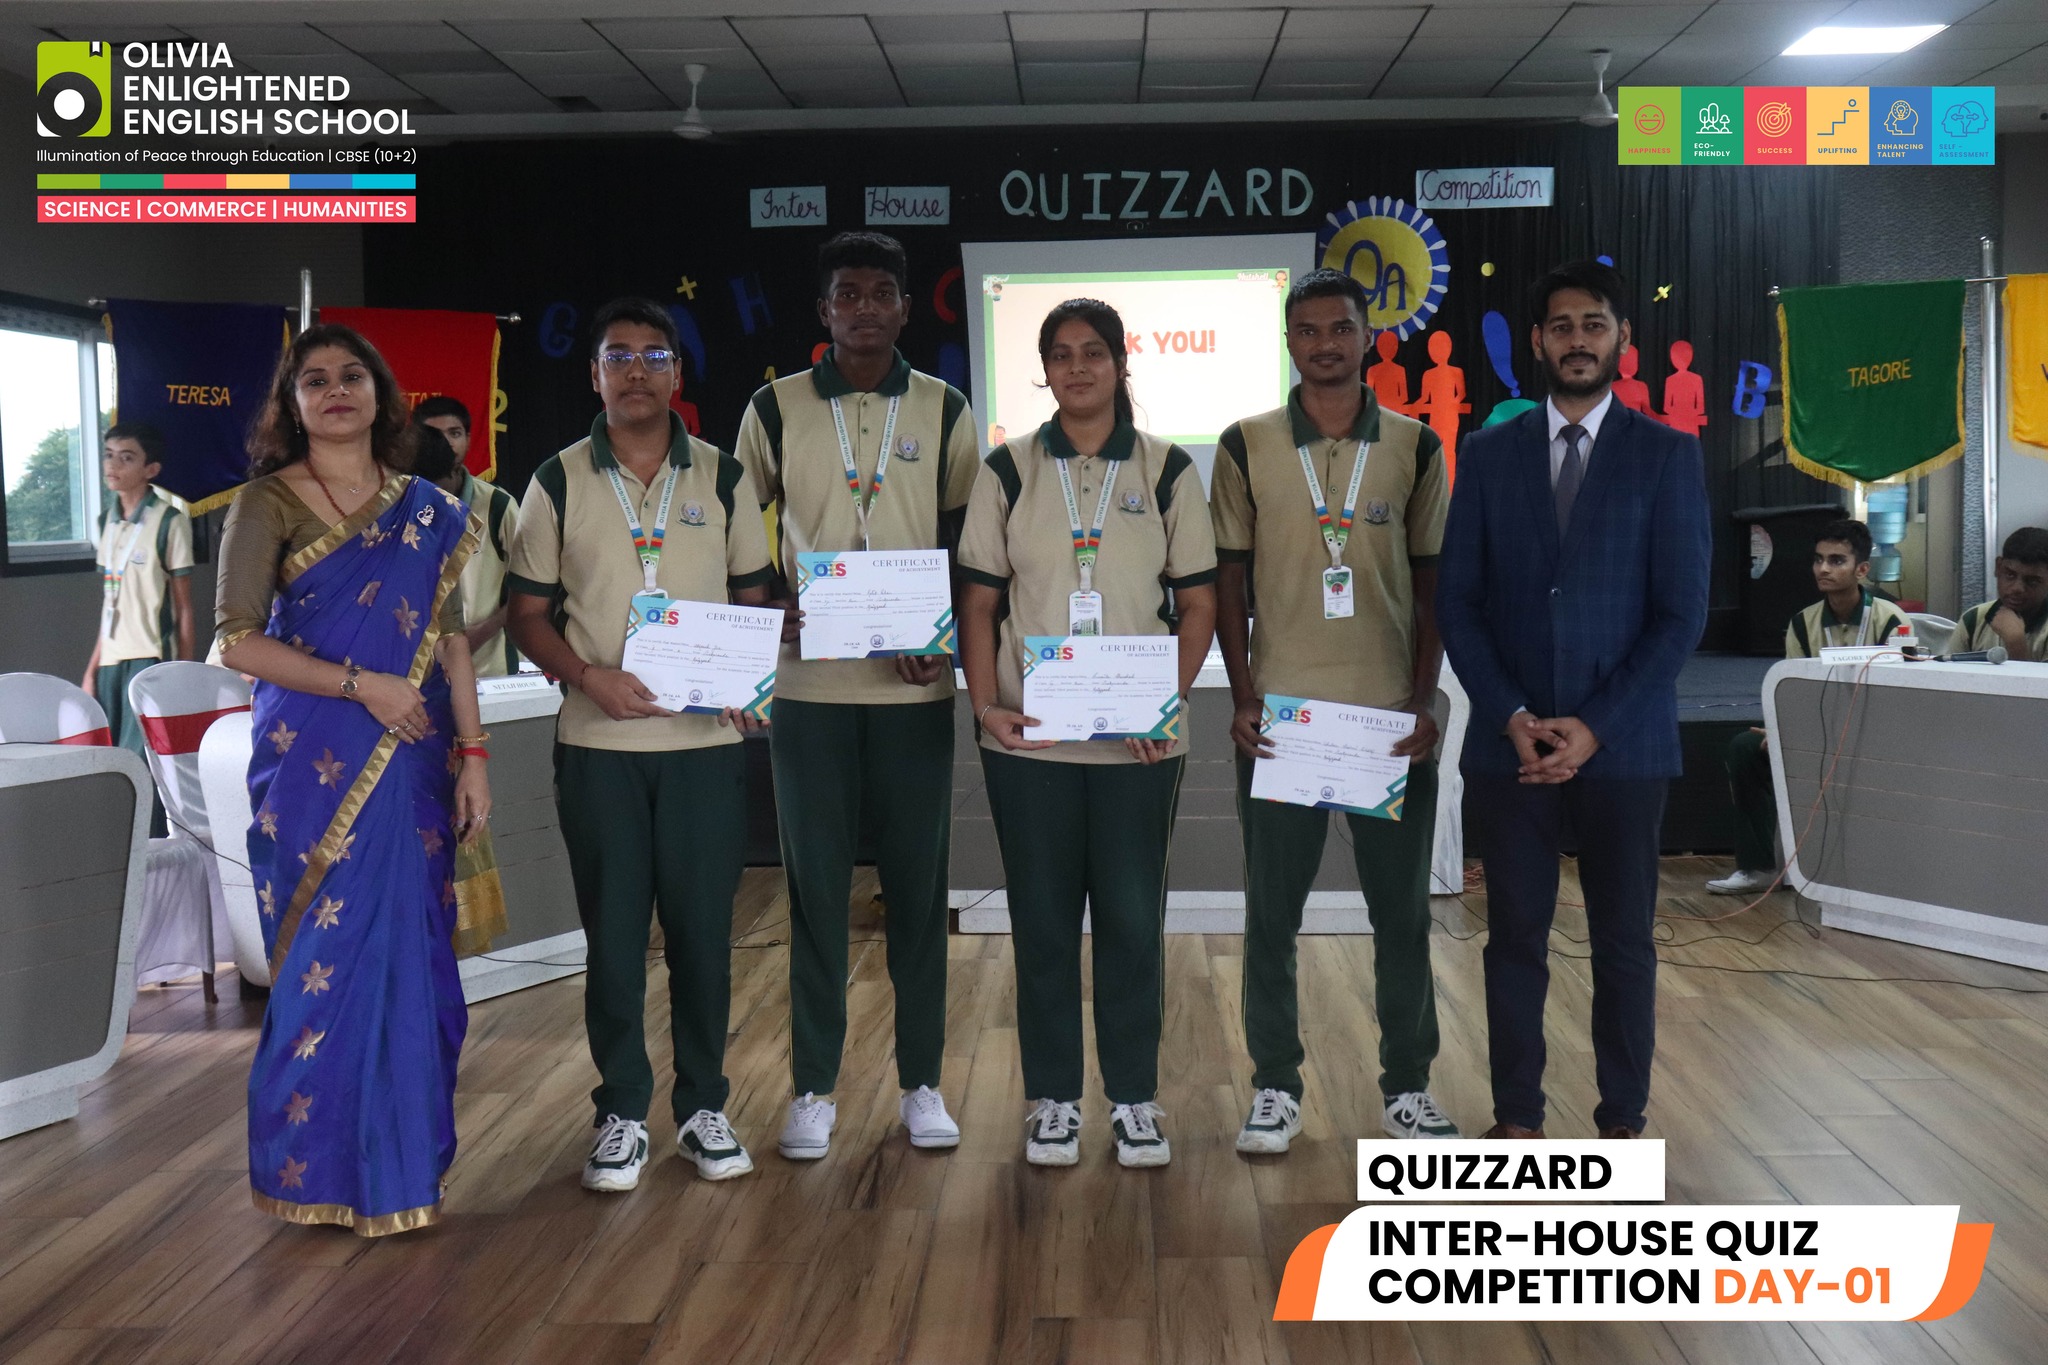 Quizzard- Inter-House Competition Classes VI to XII